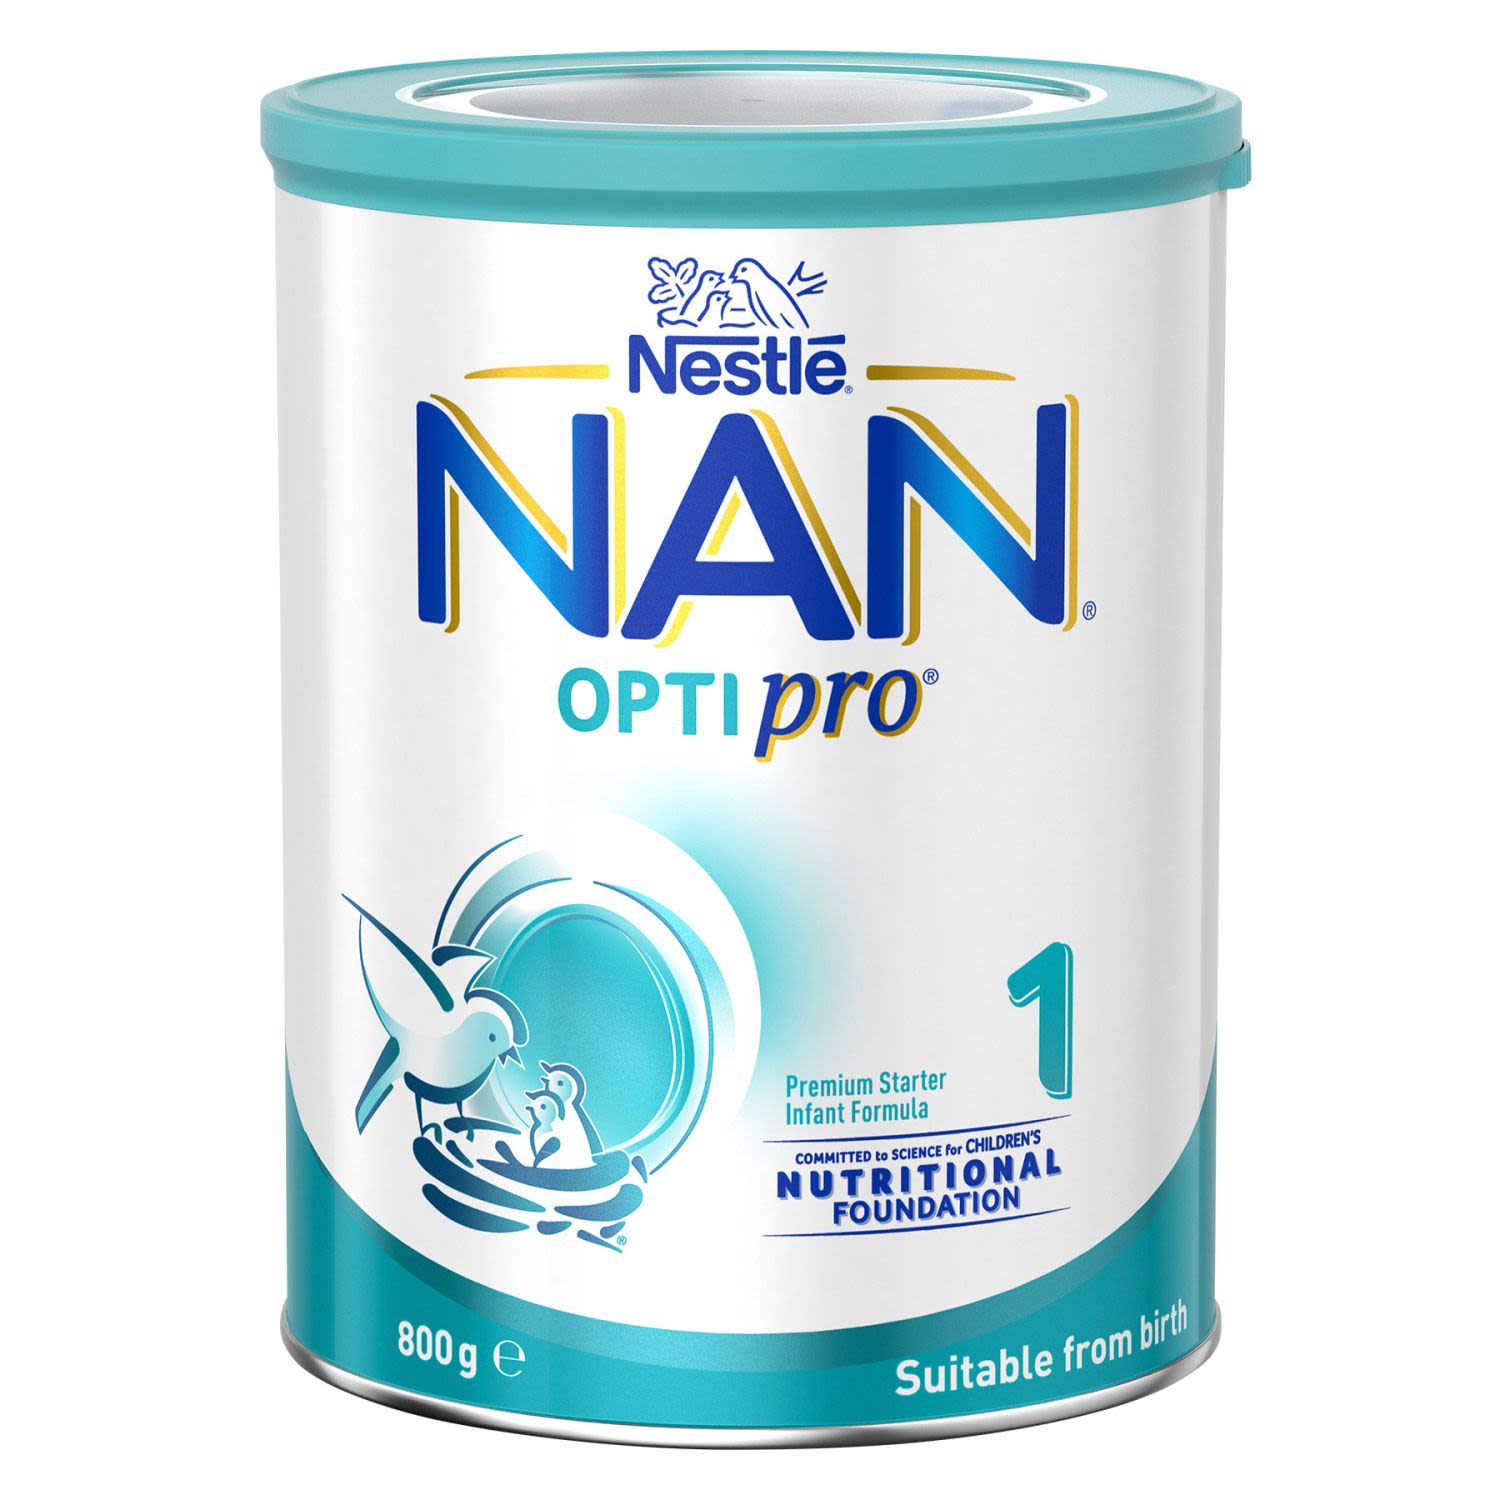 NAN OPTIPRO 1 is a premium starter infant formula that is specially designed to help ensure your formula fed infant receives balanced, high quality nutrition. NAN OPTIPRO 1 is nutritionally complete for healthy infants from birth.

Backed by over 150 years of infant nutrition expertise, Nestlé has helped to nurture generations of formula fed infants.

For hygiene and convenience, it is available in an innovative packaging format with a separate storage area for the scoop, and a semi-transparent window which allows you to see how much powder is left in the can without having to open it.<br /> <br /><br />Allergen may be present: Milk, Soy <br /><br />Country of Origin: Made in The Netherlands